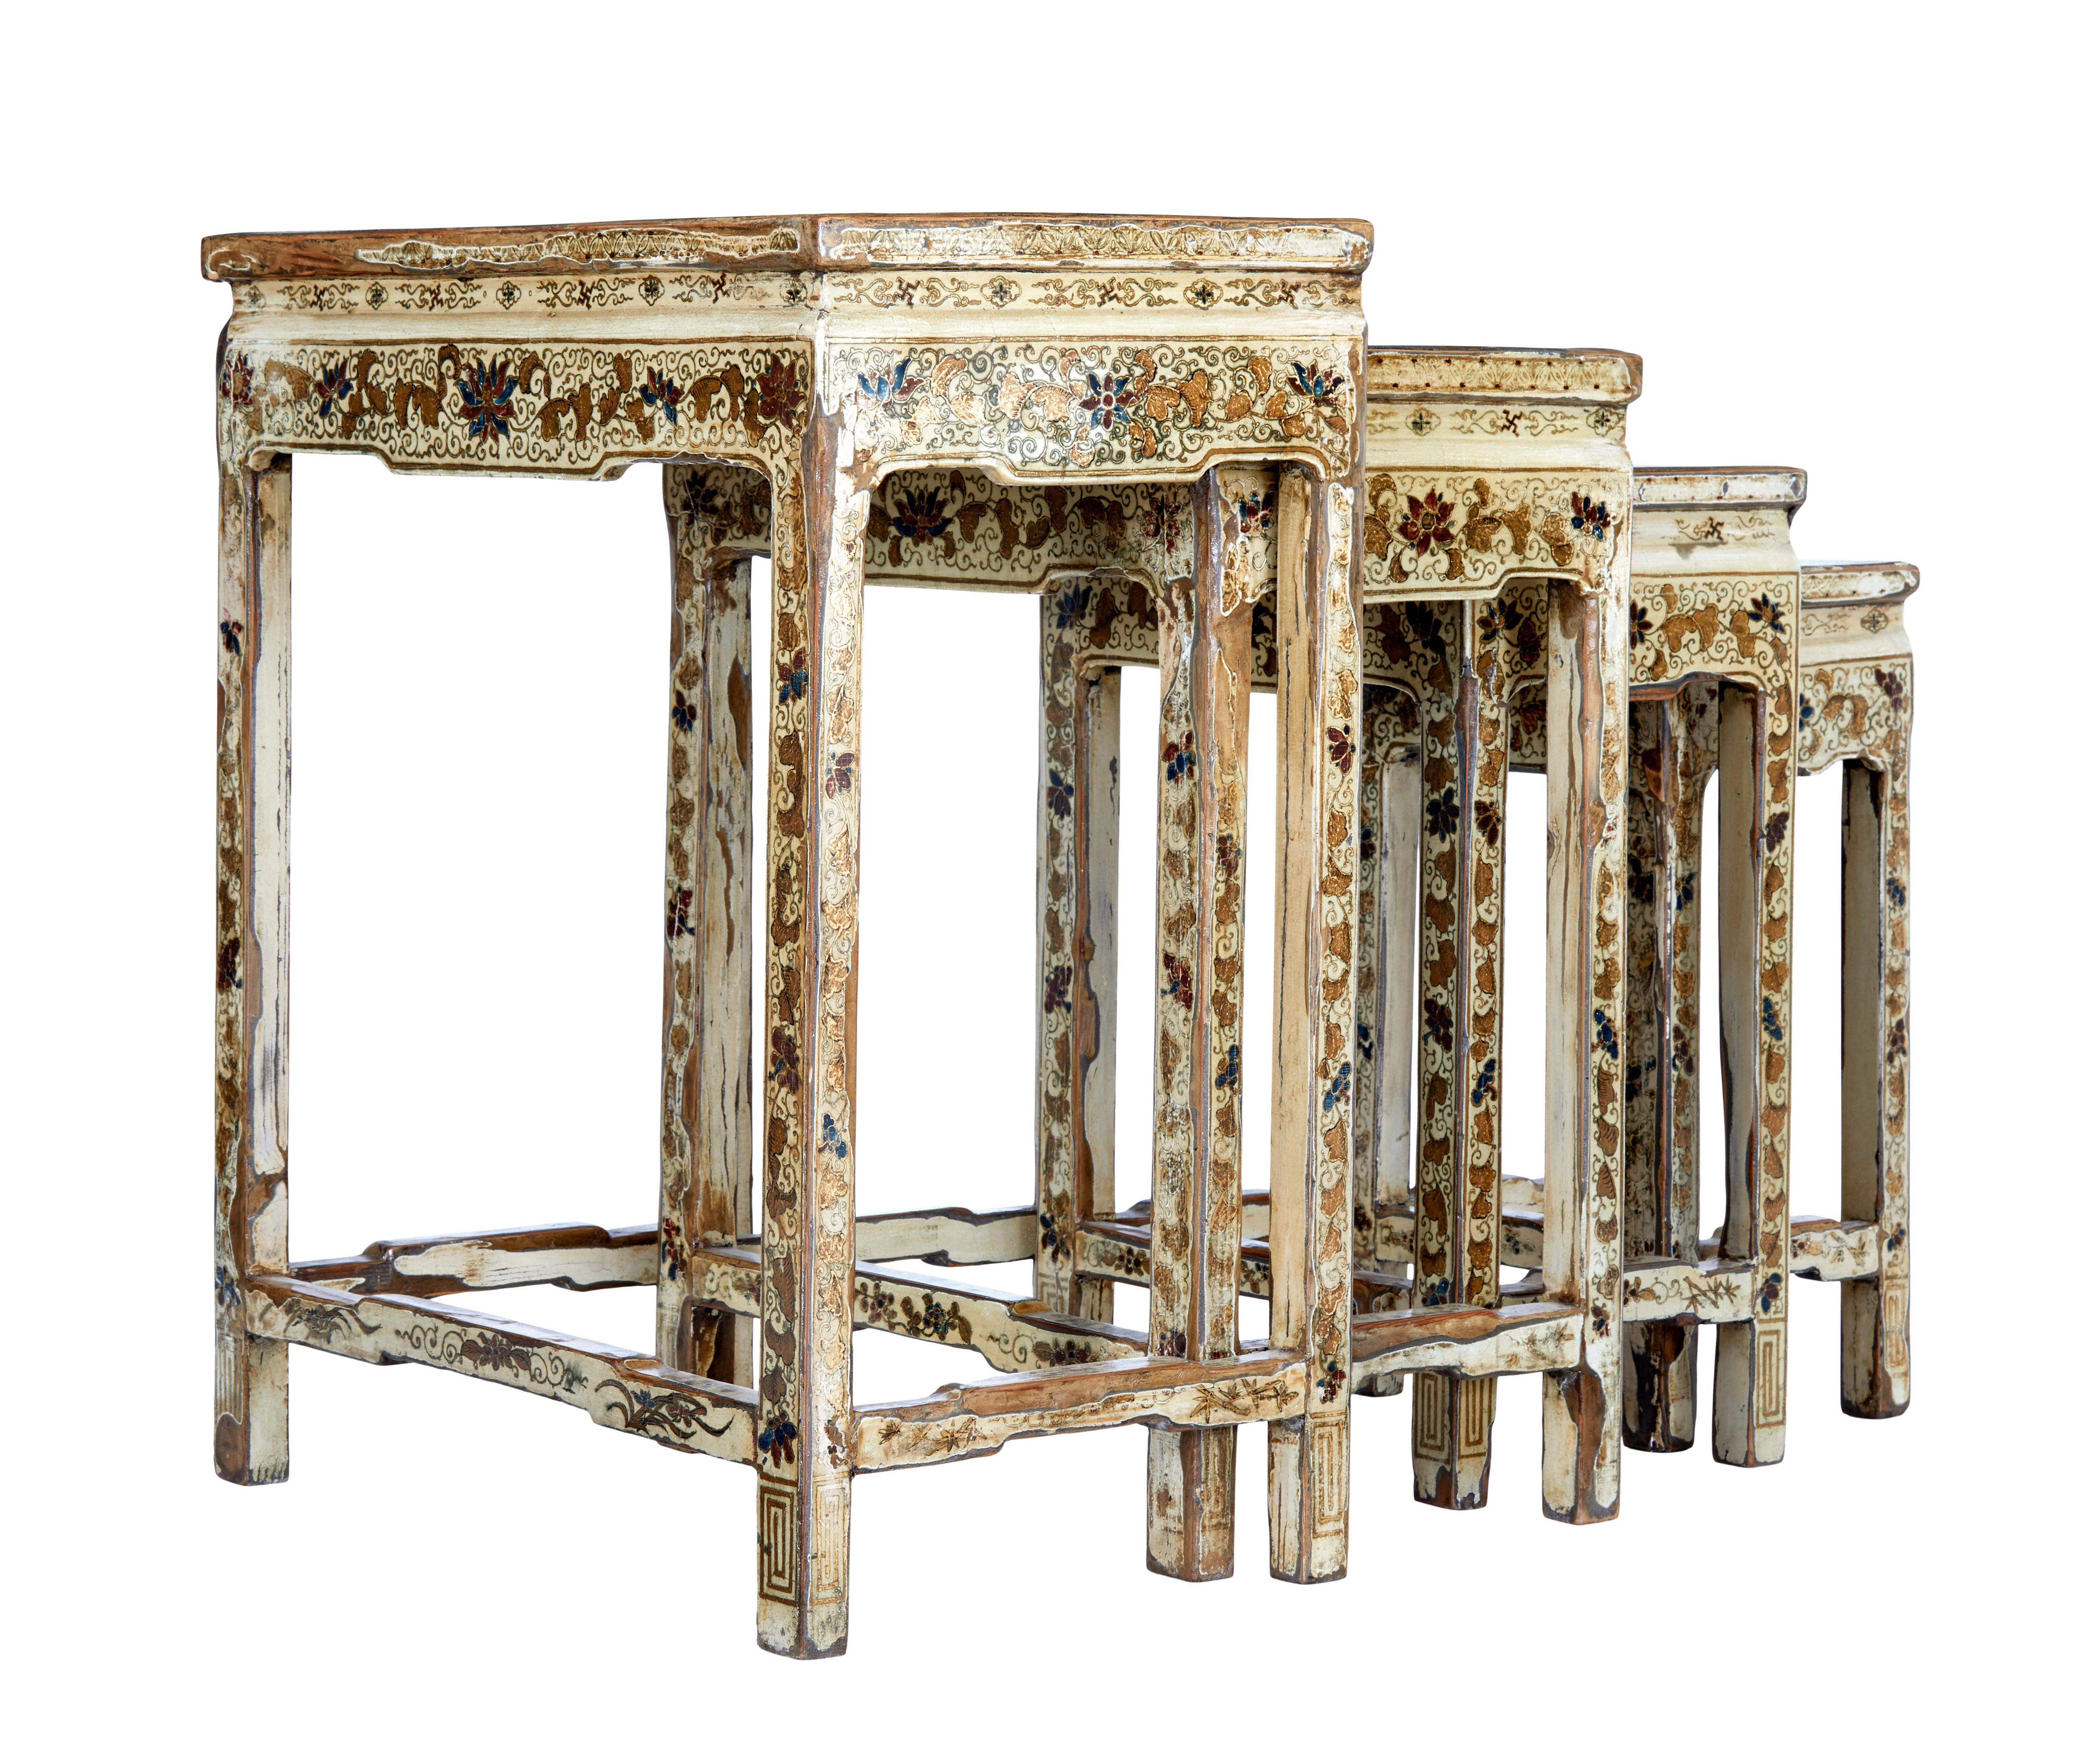 Lacquered Early 20th century nest of 4 lacquered and decorated tables For Sale